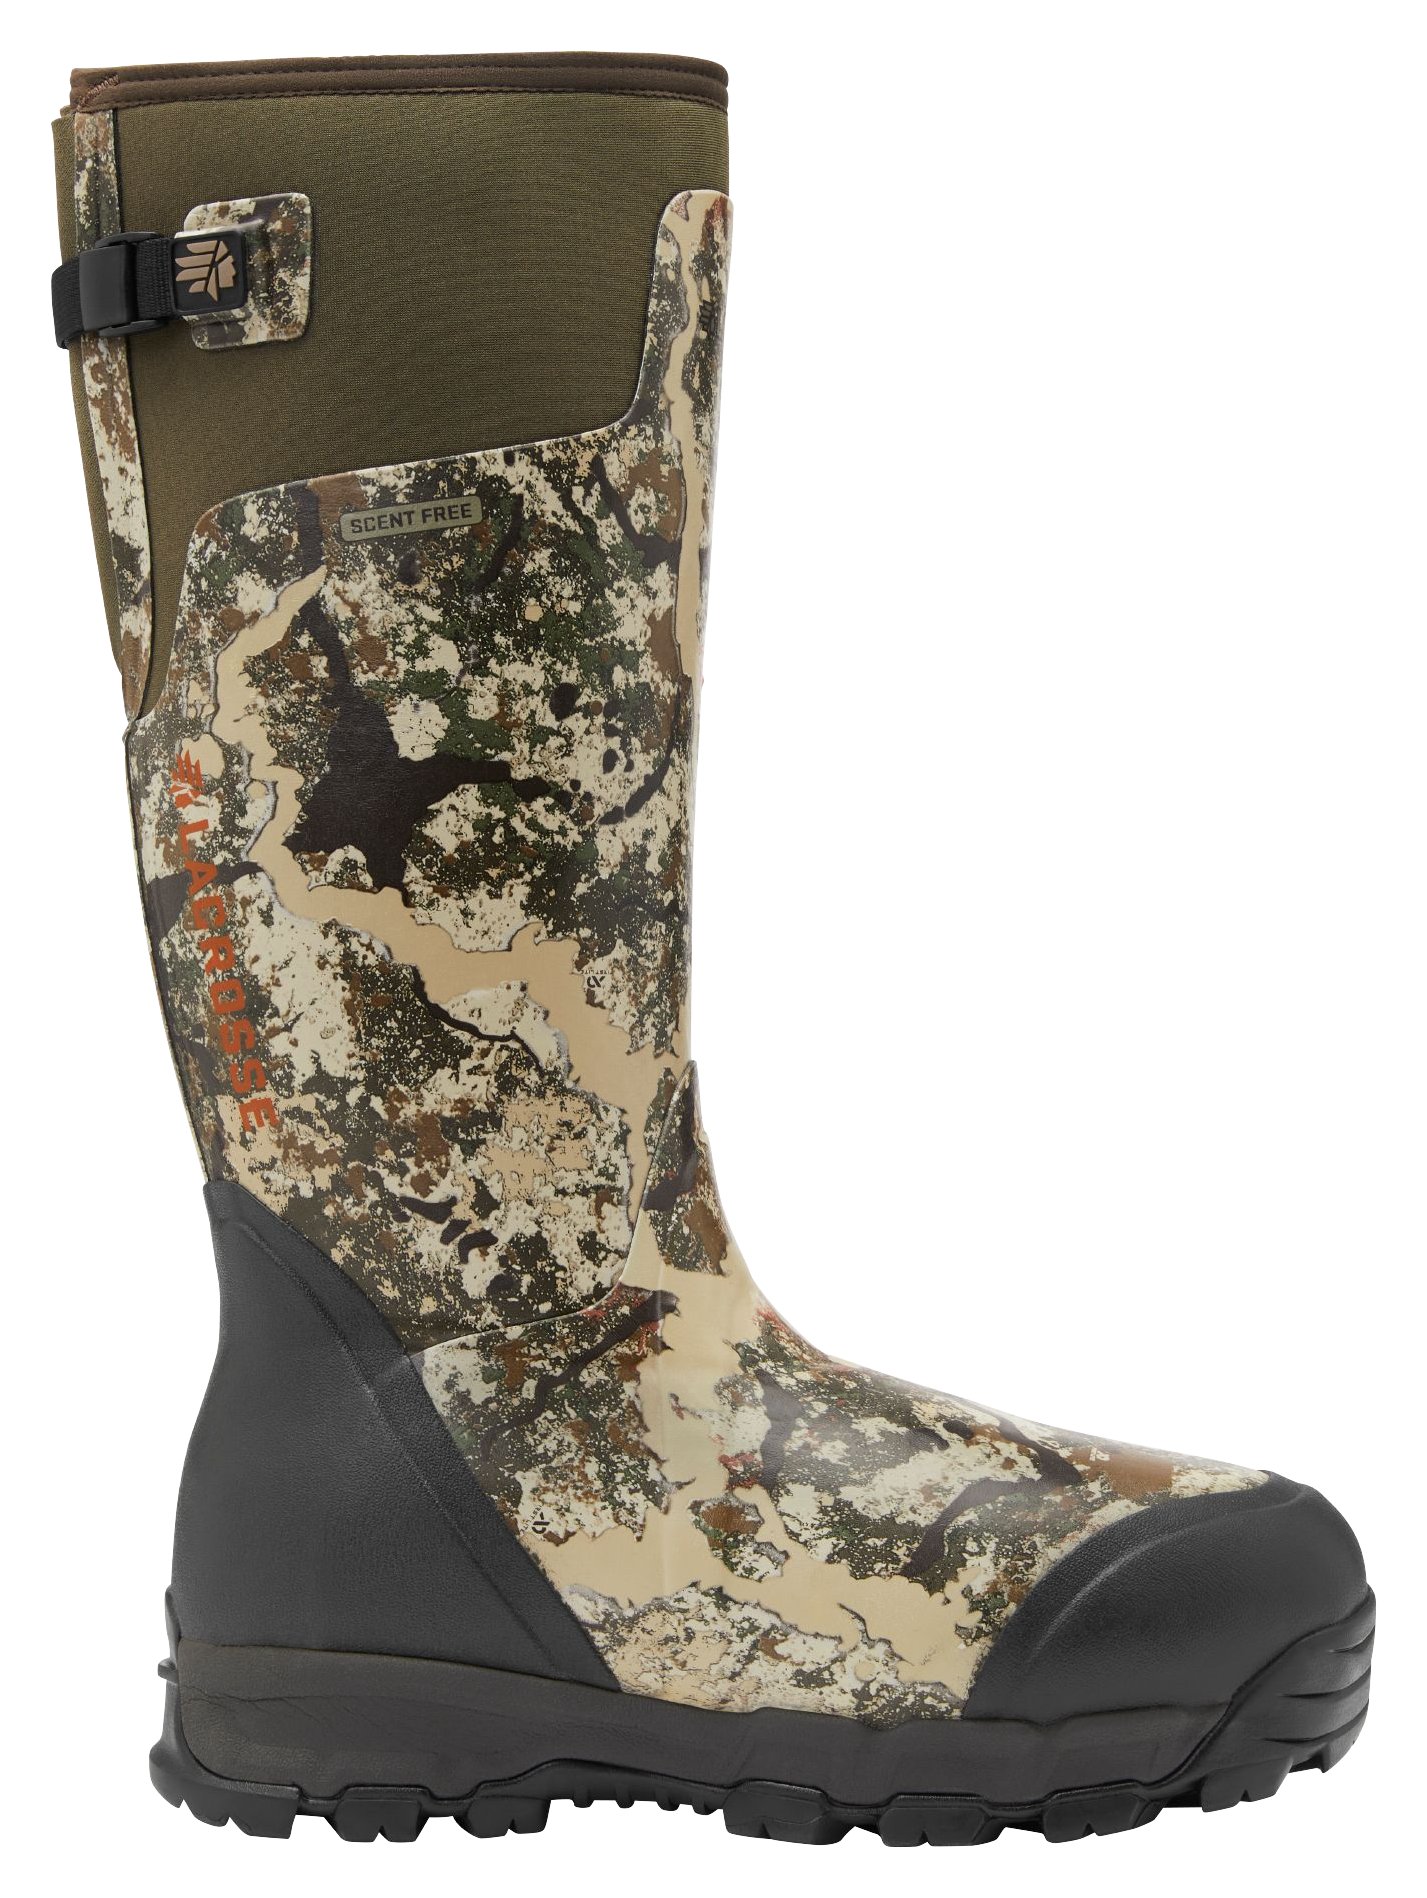 LaCrosse AlphaBurly Pro 1,600 Insulated Hunting Boots for Men - First Lite Specter - 8M